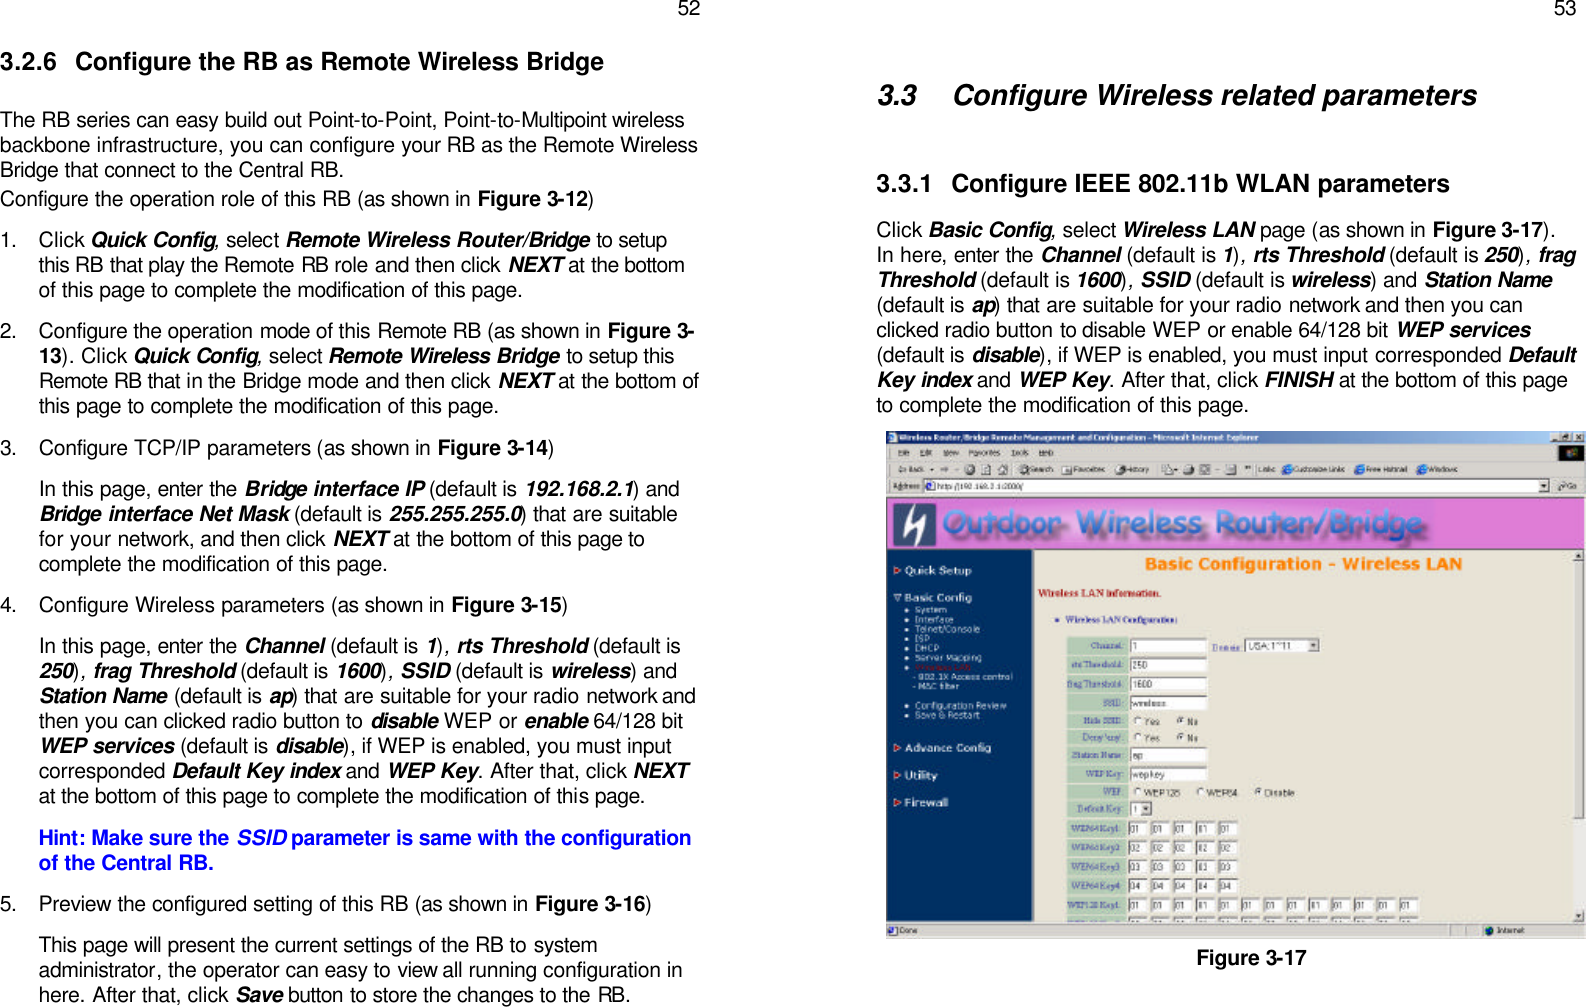   52 3.2.6 Configure the RB as Remote Wireless Bridge   The RB series can easy build out Point-to-Point, Point-to-Multipoint wireless backbone infrastructure, you can configure your RB as the Remote Wireless Bridge that connect to the Central RB. Configure the operation role of this RB (as shown in Figure 3-12) 1. Click Quick Config, select Remote Wireless Router/Bridge to setup this RB that play the Remote RB role and then click NEXT at the bottom of this page to complete the modification of this page. 2. Configure the operation mode of this Remote RB (as shown in Figure 3-13). Click Quick Config, select Remote Wireless Bridge to setup this Remote RB that in the Bridge mode and then click NEXT at the bottom of this page to complete the modification of this page. 3. Configure TCP/IP parameters (as shown in Figure 3-14) In this page, enter the Bridge interface IP (default is 192.168.2.1) and Bridge interface Net Mask (default is 255.255.255.0) that are suitable for your network, and then click NEXT at the bottom of this page to complete the modification of this page. 4. Configure Wireless parameters (as shown in Figure 3-15) In this page, enter the Channel (default is 1), rts Threshold (default is 250), frag Threshold (default is 1600), SSID (default is wireless) and Station Name (default is ap) that are suitable for your radio network and then you can clicked radio button to disable WEP or enable 64/128 bit WEP services (default is disable), if WEP is enabled, you must input corresponded Default Key index and WEP Key. After that, click NEXT at the bottom of this page to complete the modification of this page. Hint: Make sure the SSID parameter is same with the configuration of the Central RB. 5. Preview the configured setting of this RB (as shown in Figure 3-16) This page will present the current settings of the RB to system administrator, the operator can easy to view all running configuration in here. After that, click Save button to store the changes to the RB.   53  3.3 Configure Wireless related parameters   3.3.1 Configure IEEE 802.11b WLAN parameters Click Basic Config, select Wireless LAN page (as shown in Figure 3-17). In here, enter the Channel (default is 1), rts Threshold (default is 250), frag Threshold (default is 1600), SSID (default is wireless) and Station Name (default is ap) that are suitable for your radio network and then you can clicked radio button to disable WEP or enable 64/128 bit WEP services (default is disable), if WEP is enabled, you must input corresponded Default Key index and WEP Key. After that, click FINISH at the bottom of this page to complete the modification of this page.                       Figure 3-17   